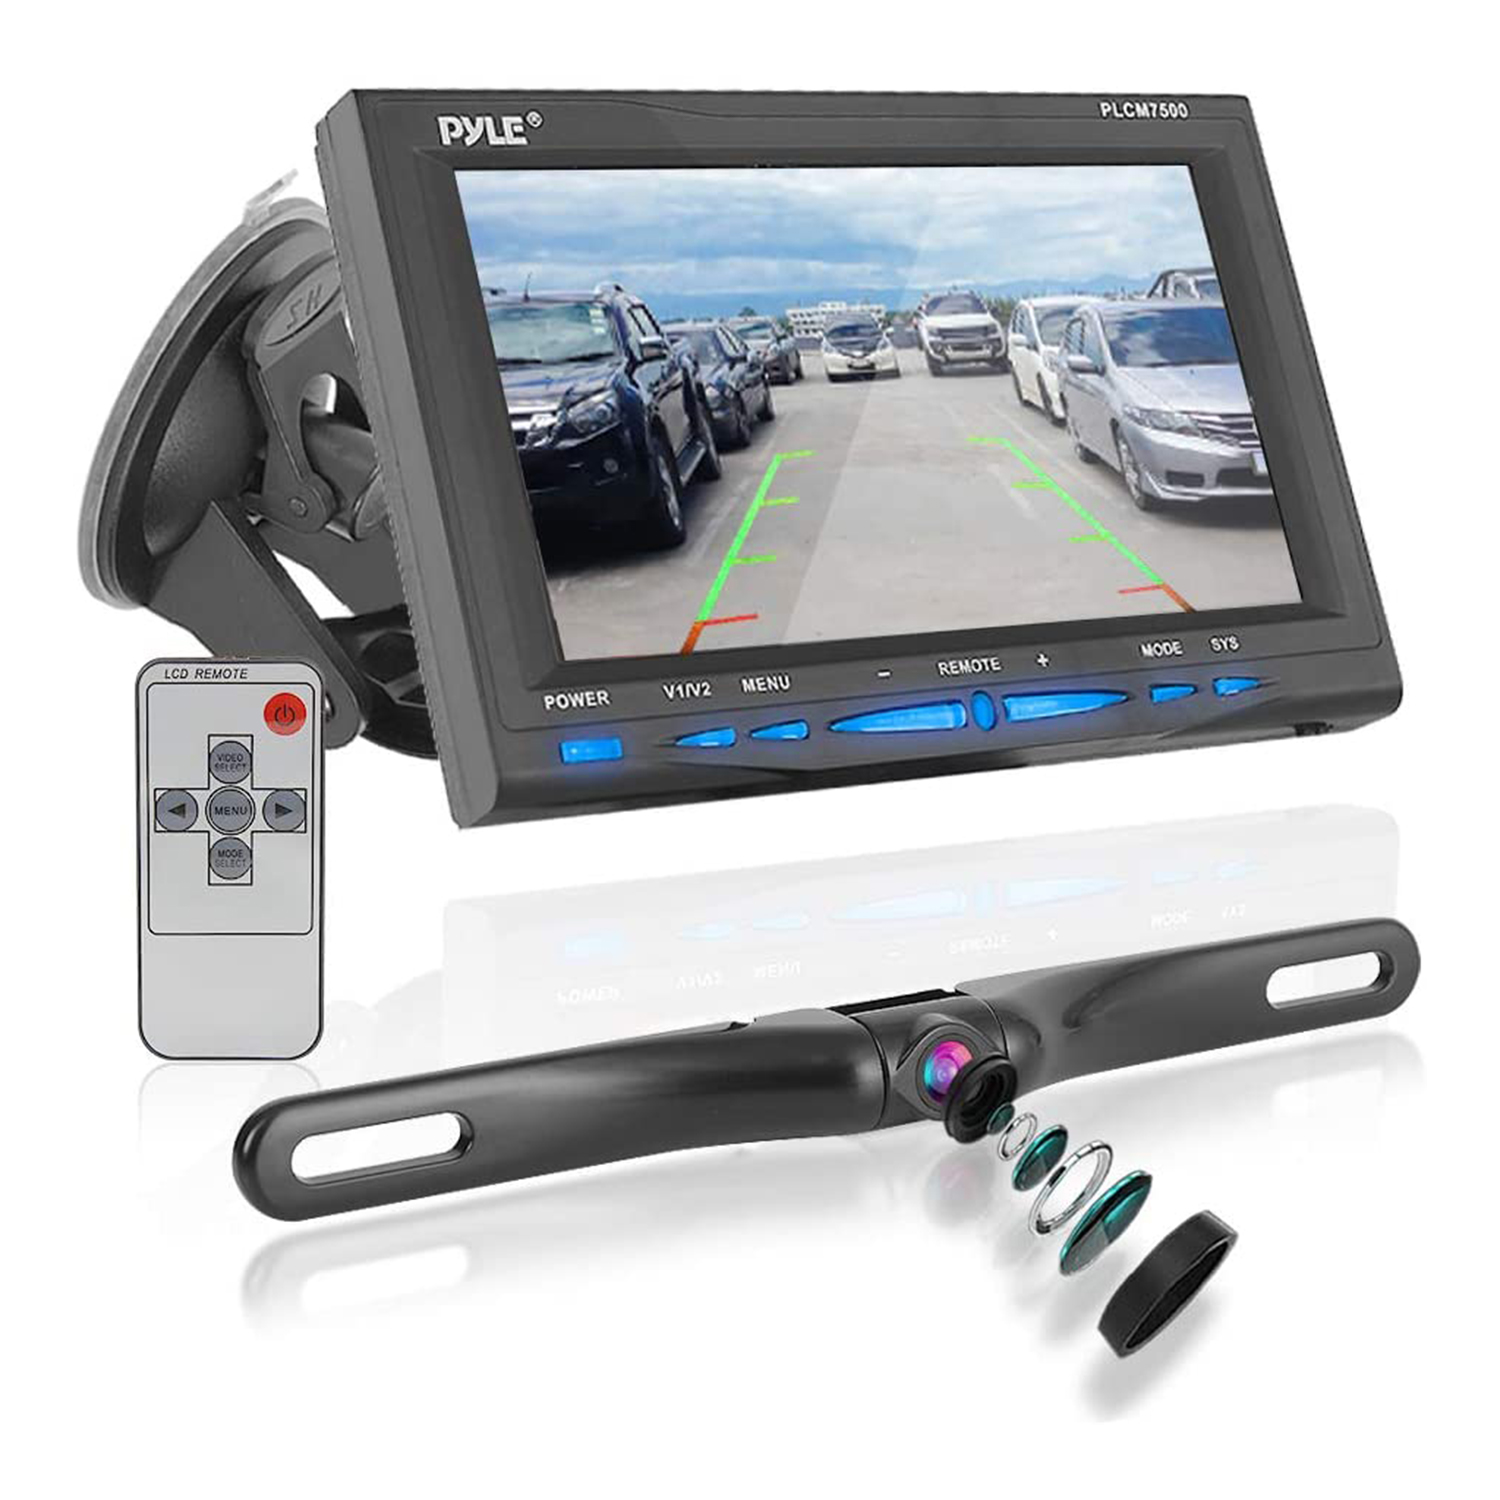 Pyle PLCM7500 7" LCD Rearview Car Backup Camera and Monitor Reverse Assist Kit - image 1 of 6